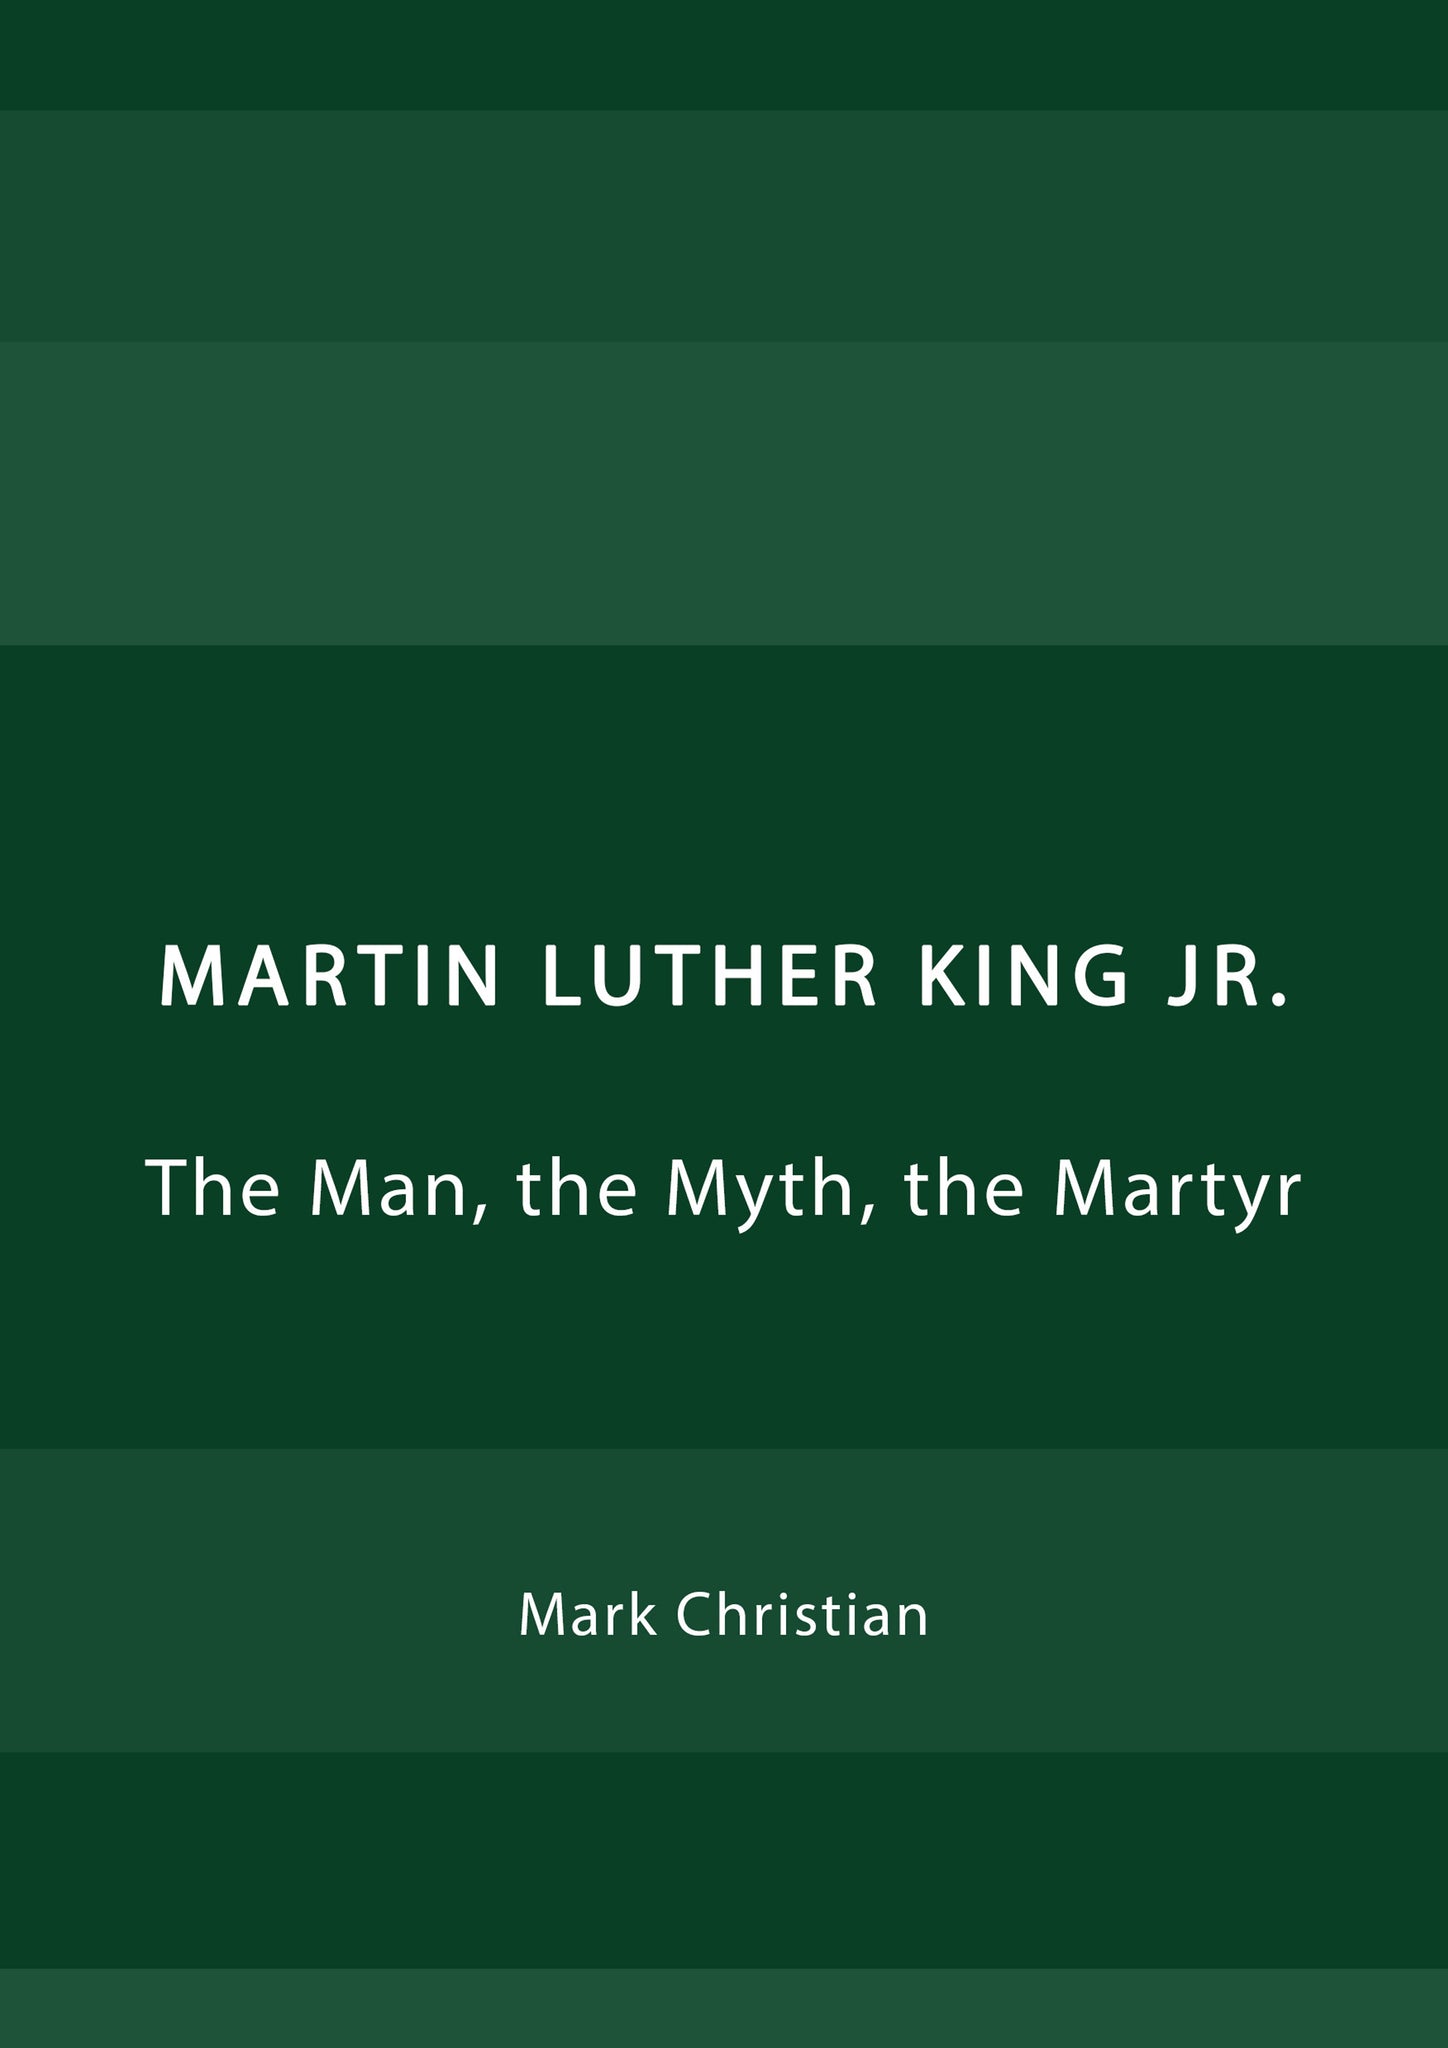 Martin Luther King Jr.: The Man, the Myth, the Martyr